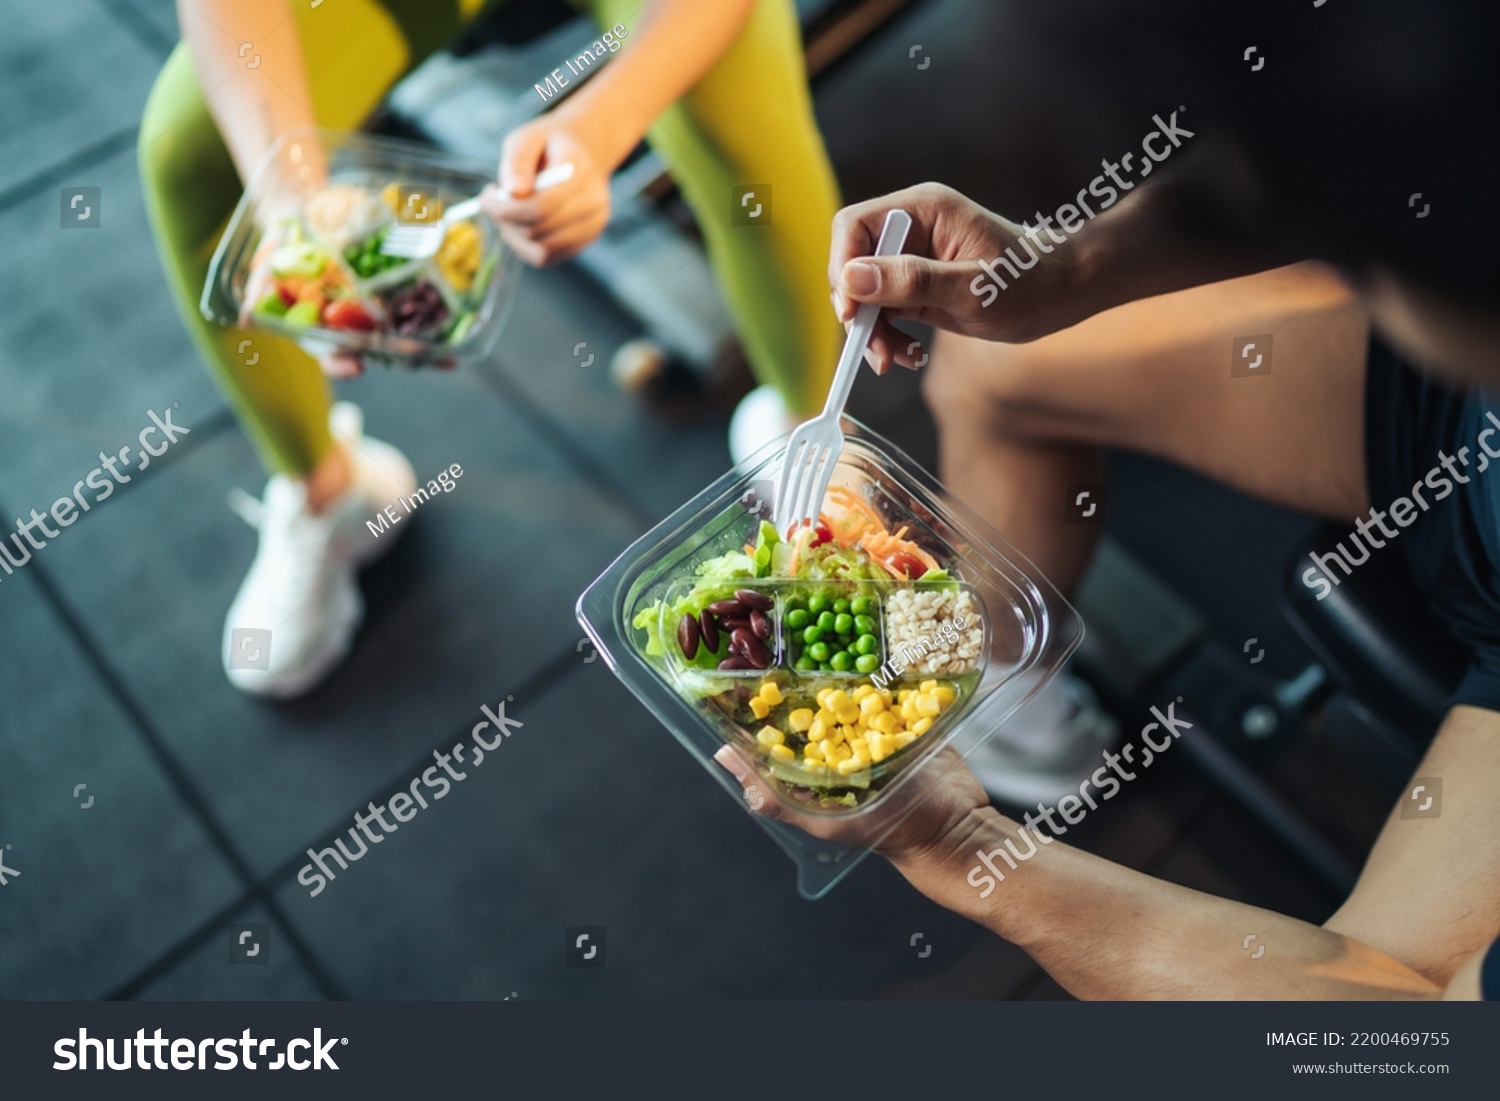 Top view Asian man and woman healthy eating salad after exercise at fitness gym. Two athlete eating salad for health together. Selective focus on salad bowl on hand. #2200469755